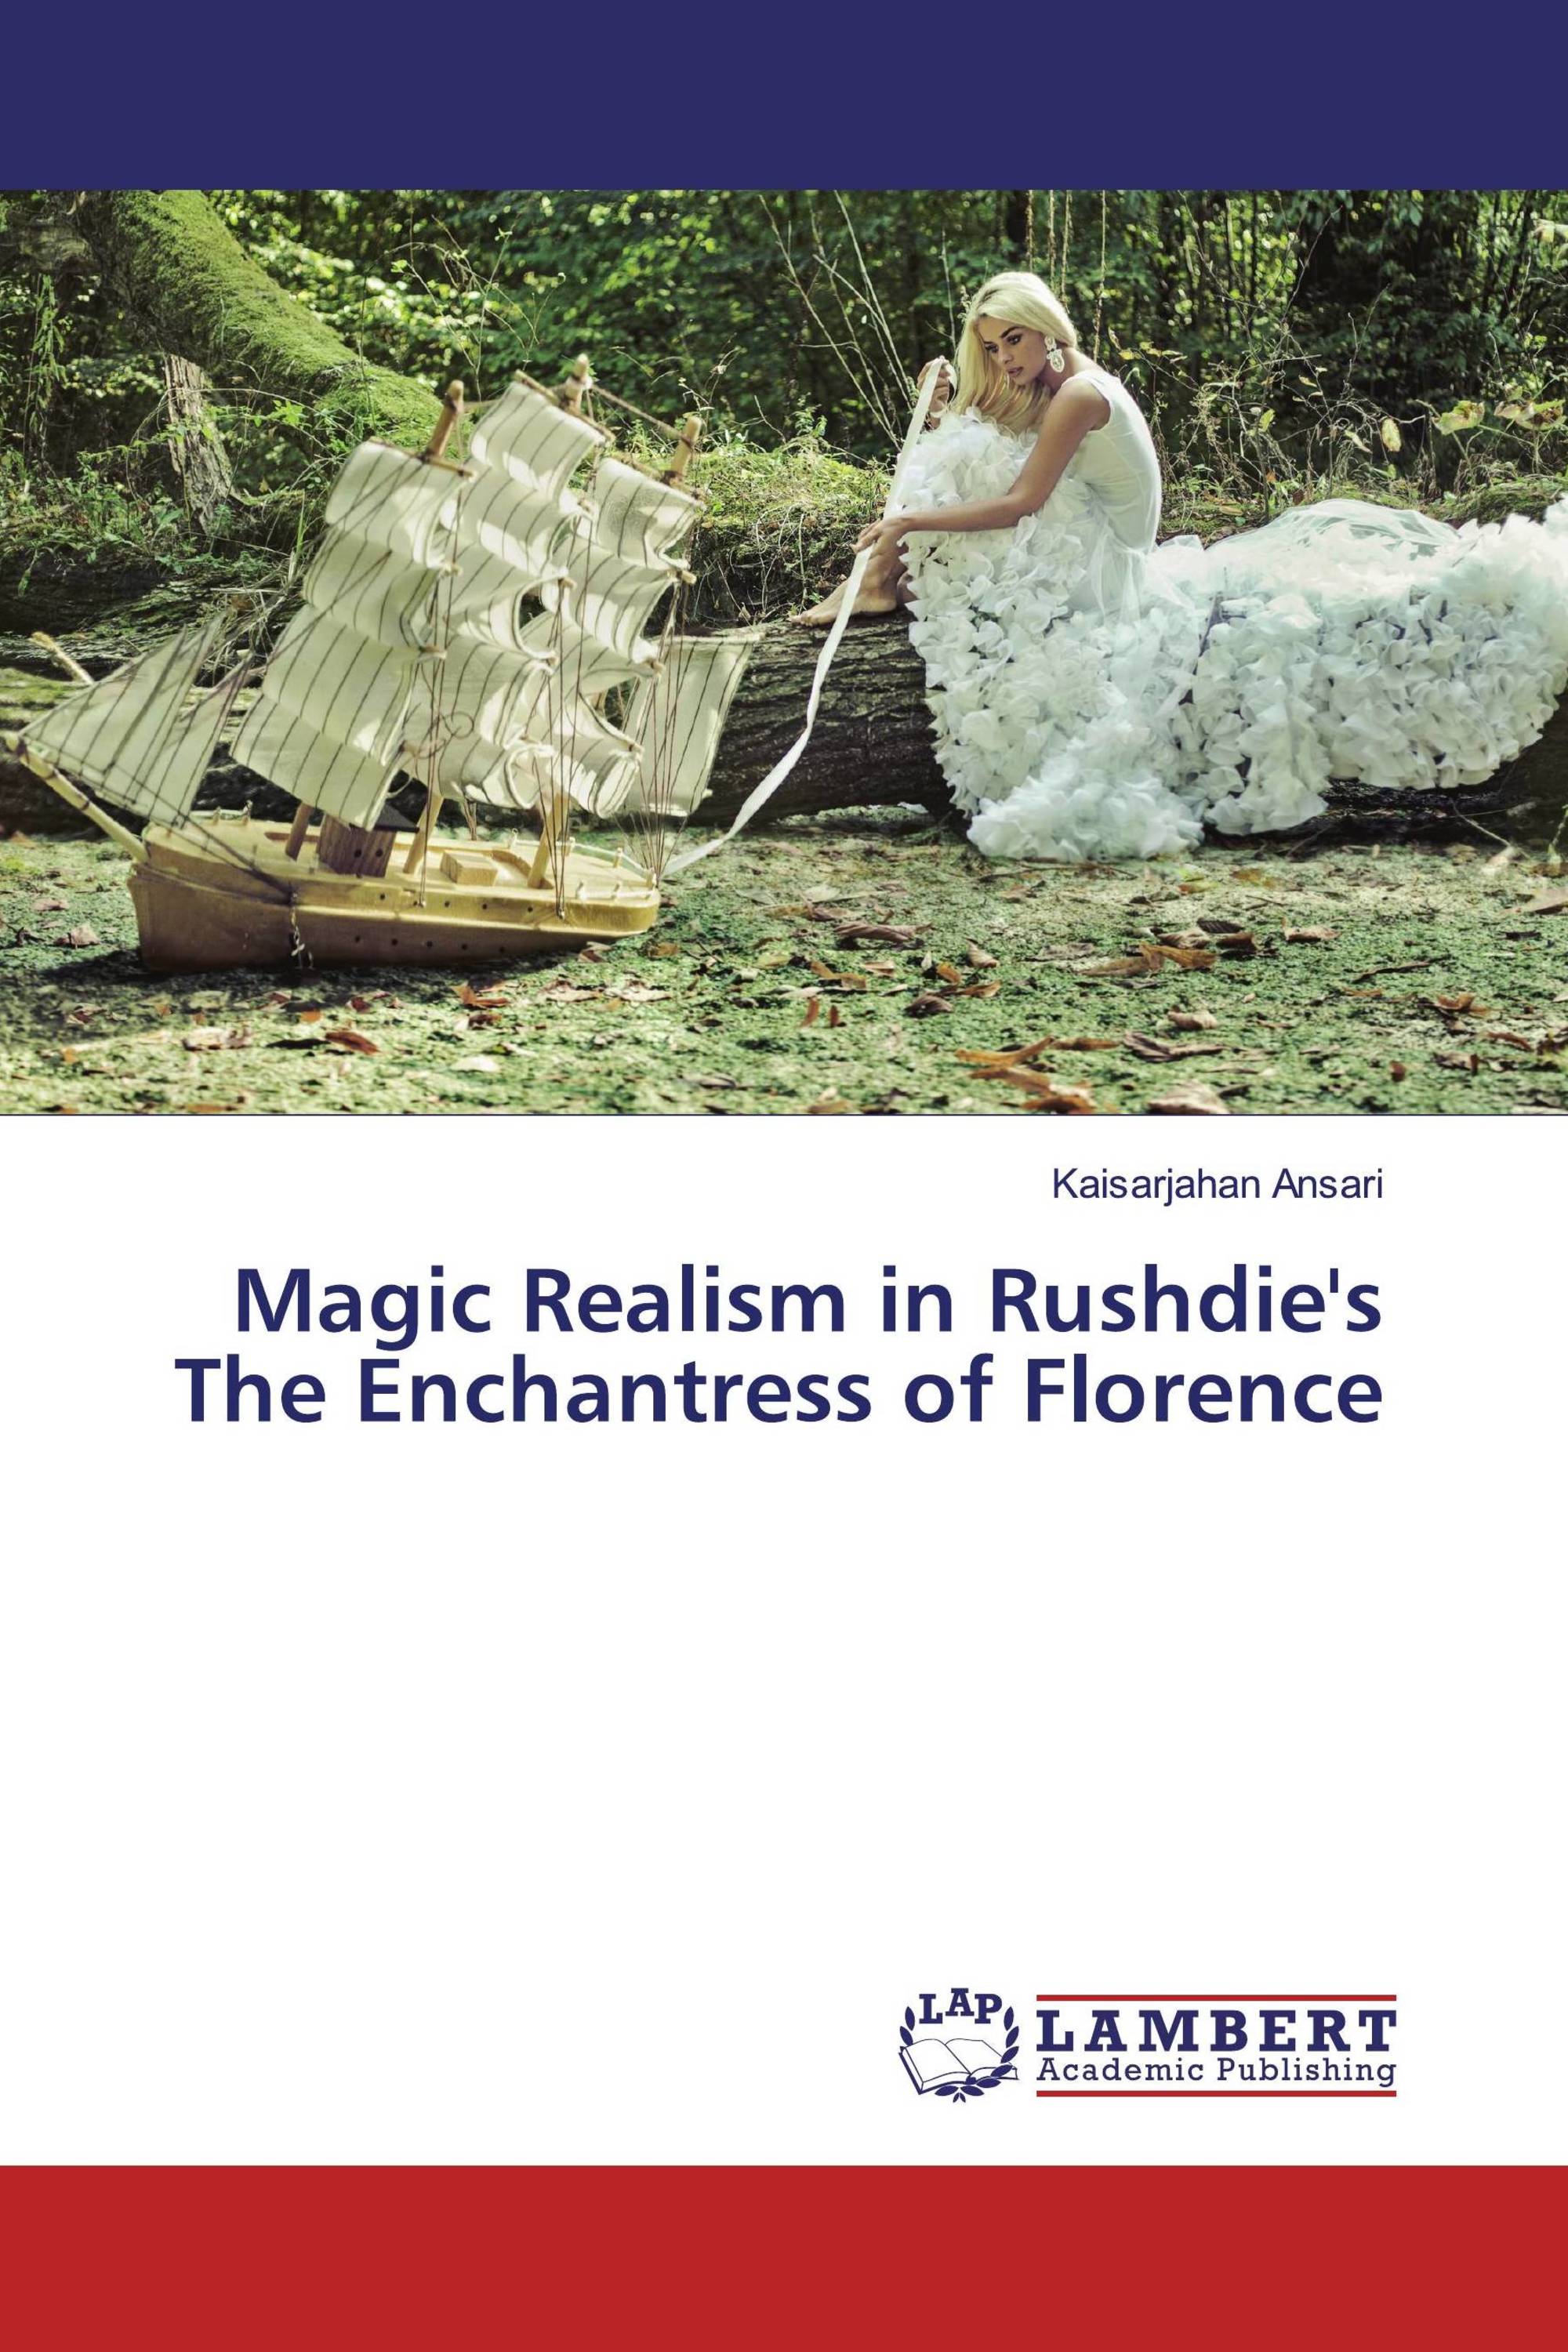 the enchantress of florence